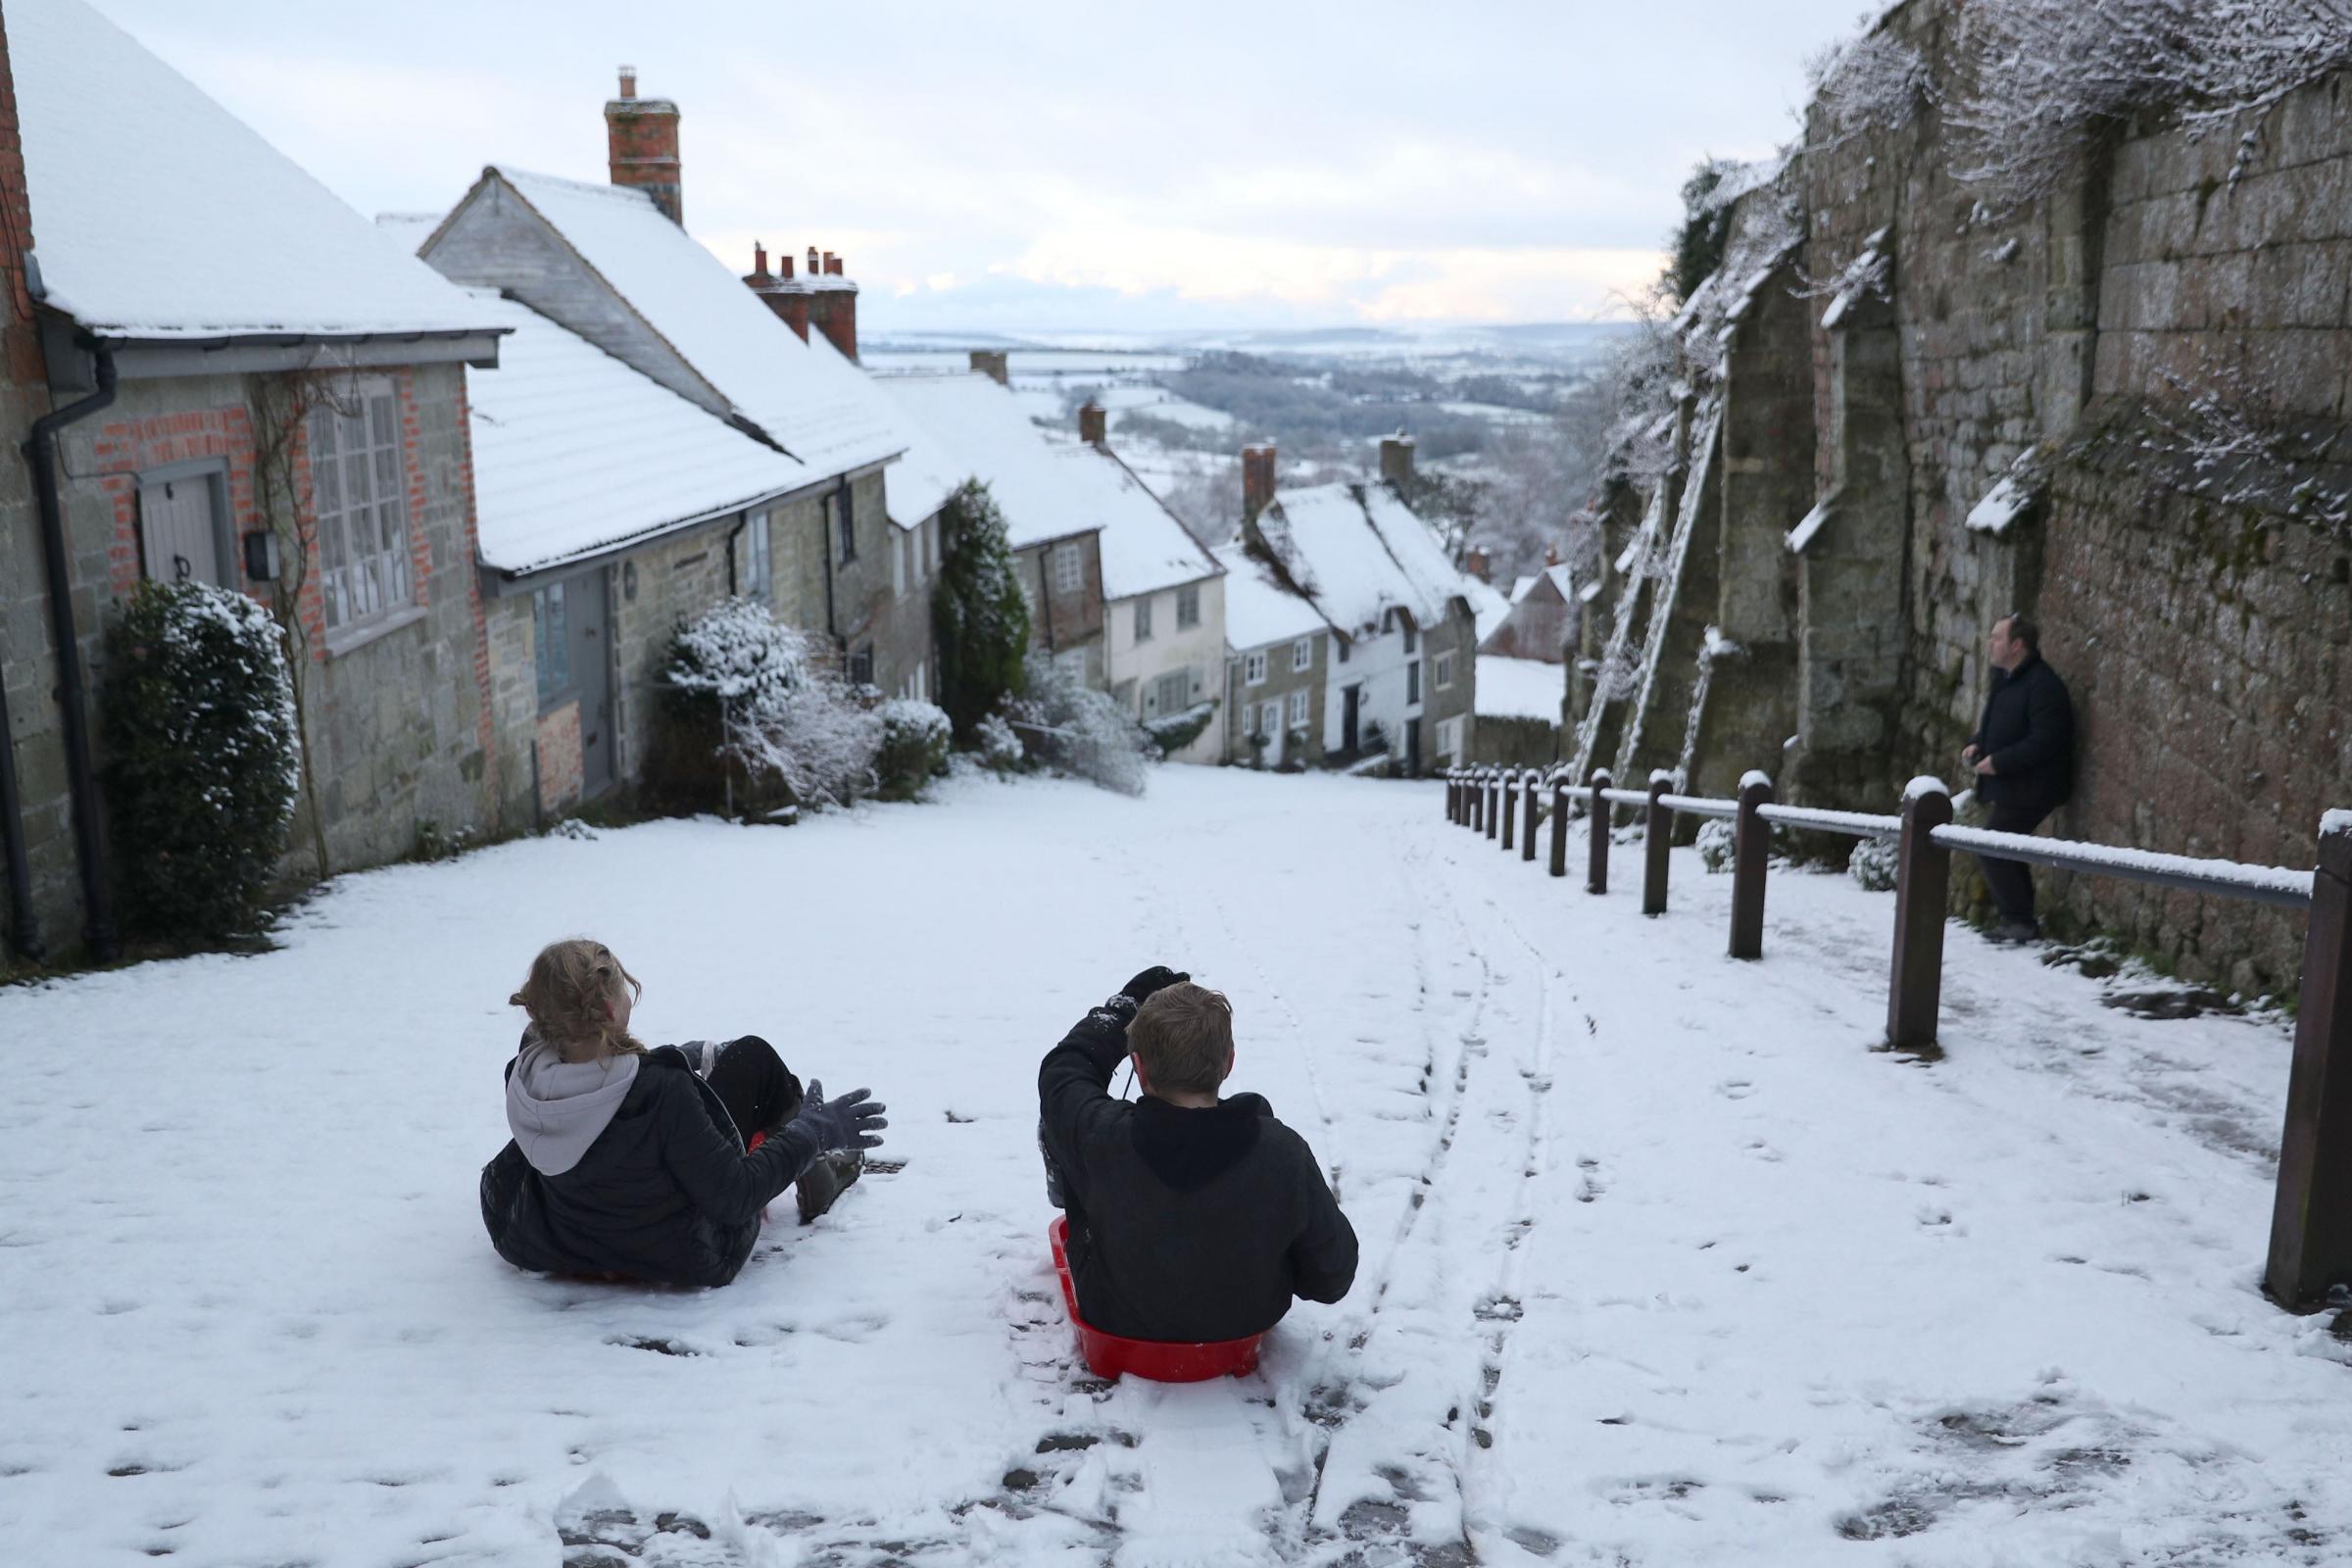 In Pictures: Fun in the snow as temperatures tumble